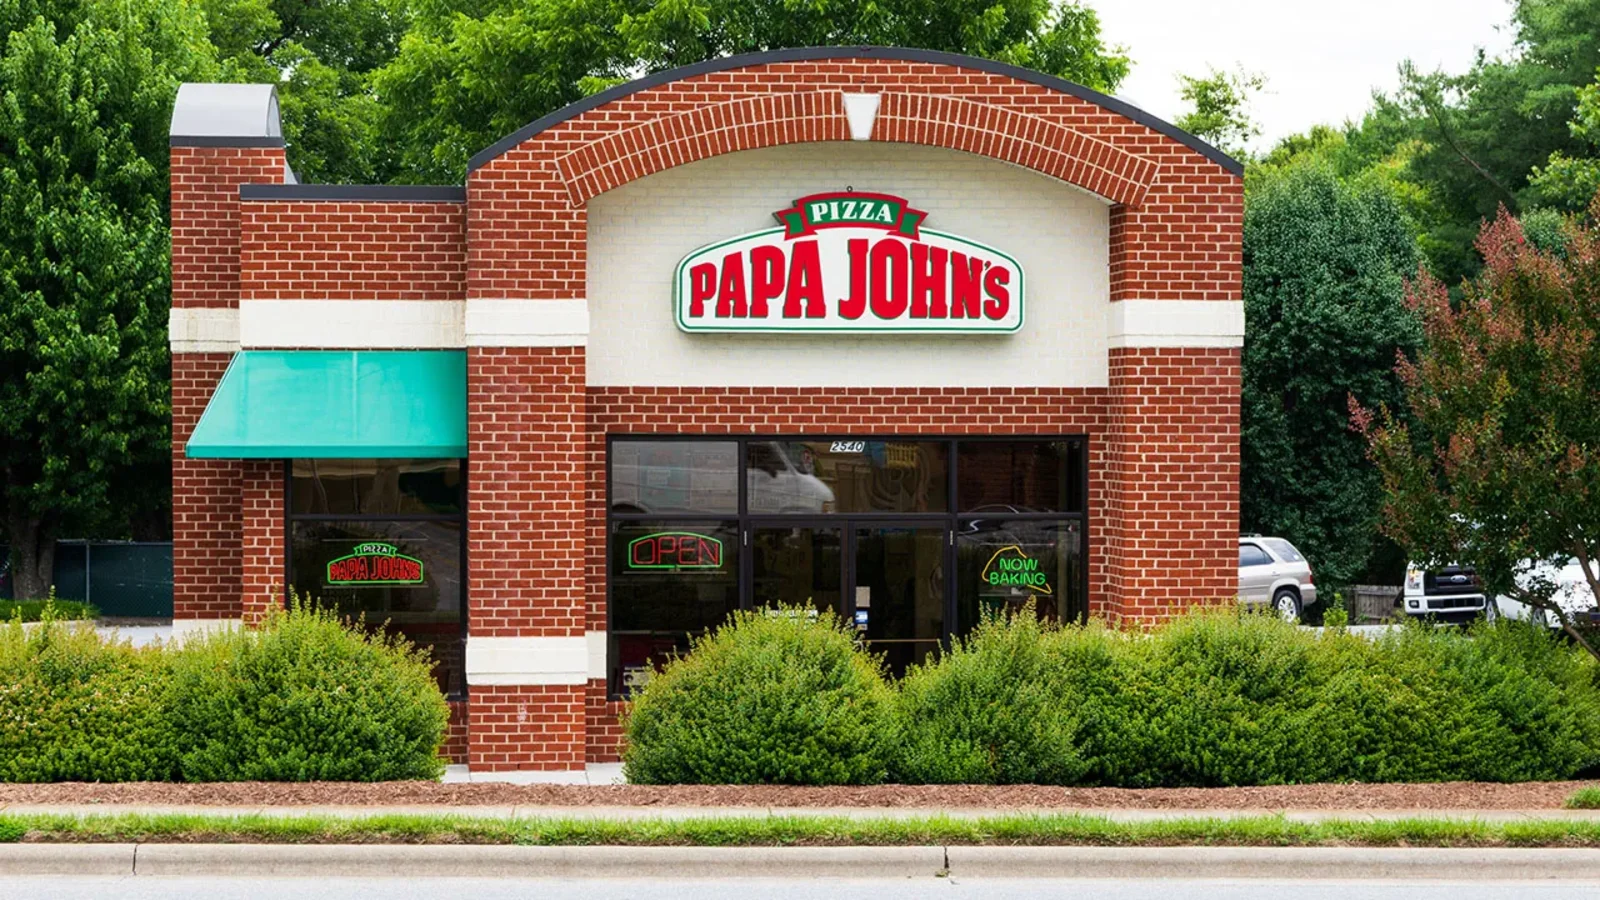 American quick service restaurant Papa John’s to open first Sub-Saharan outlet in Kenya